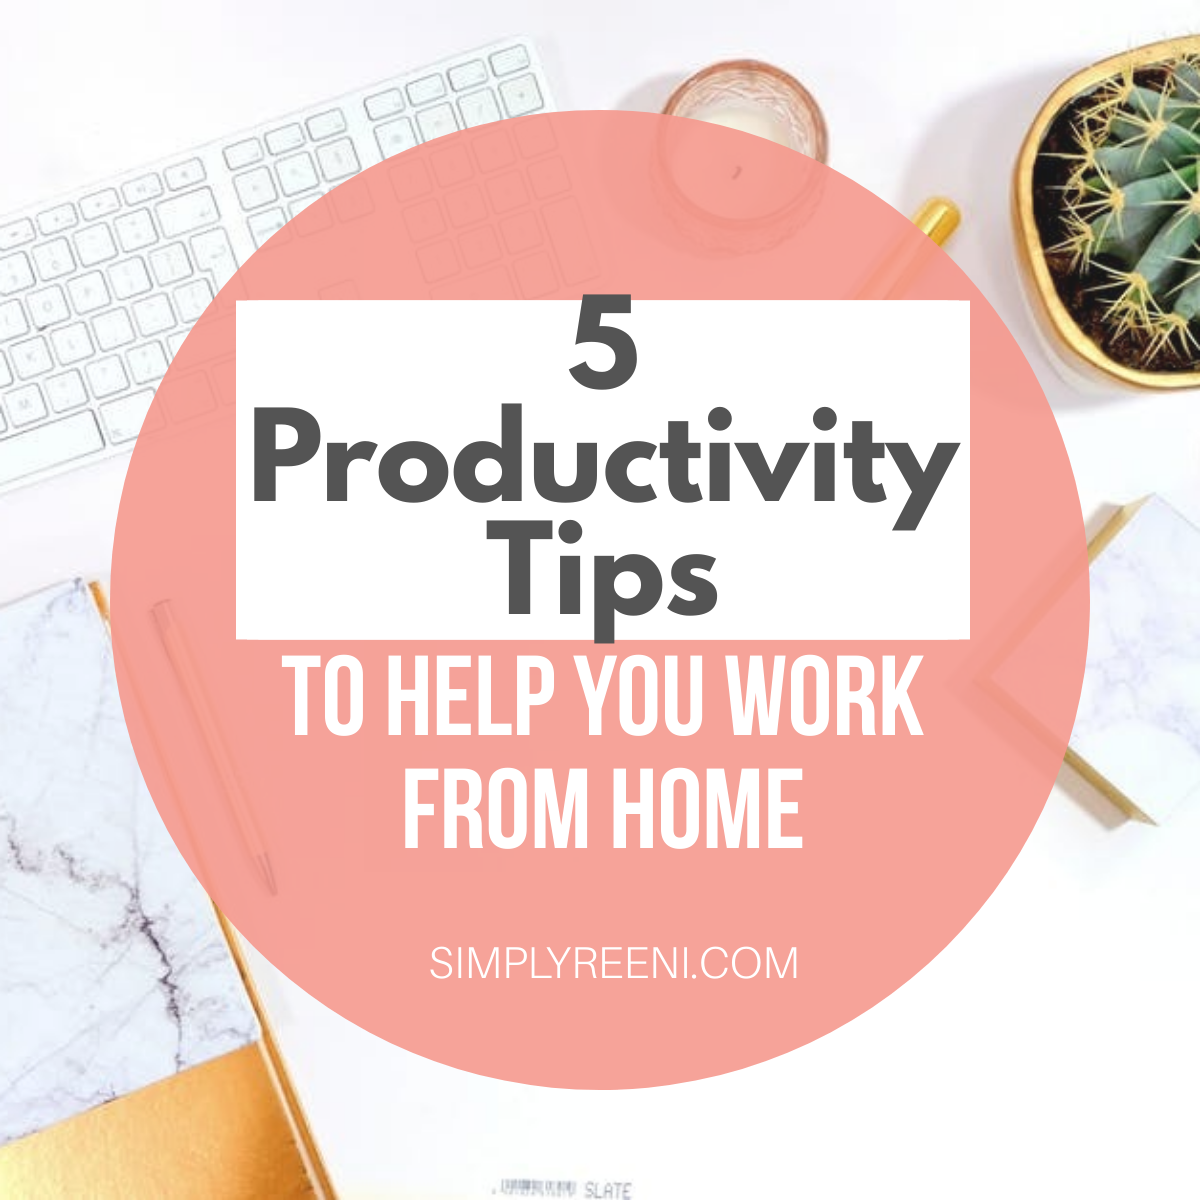 5 Simple Productivity Tips to Help You Work from Home